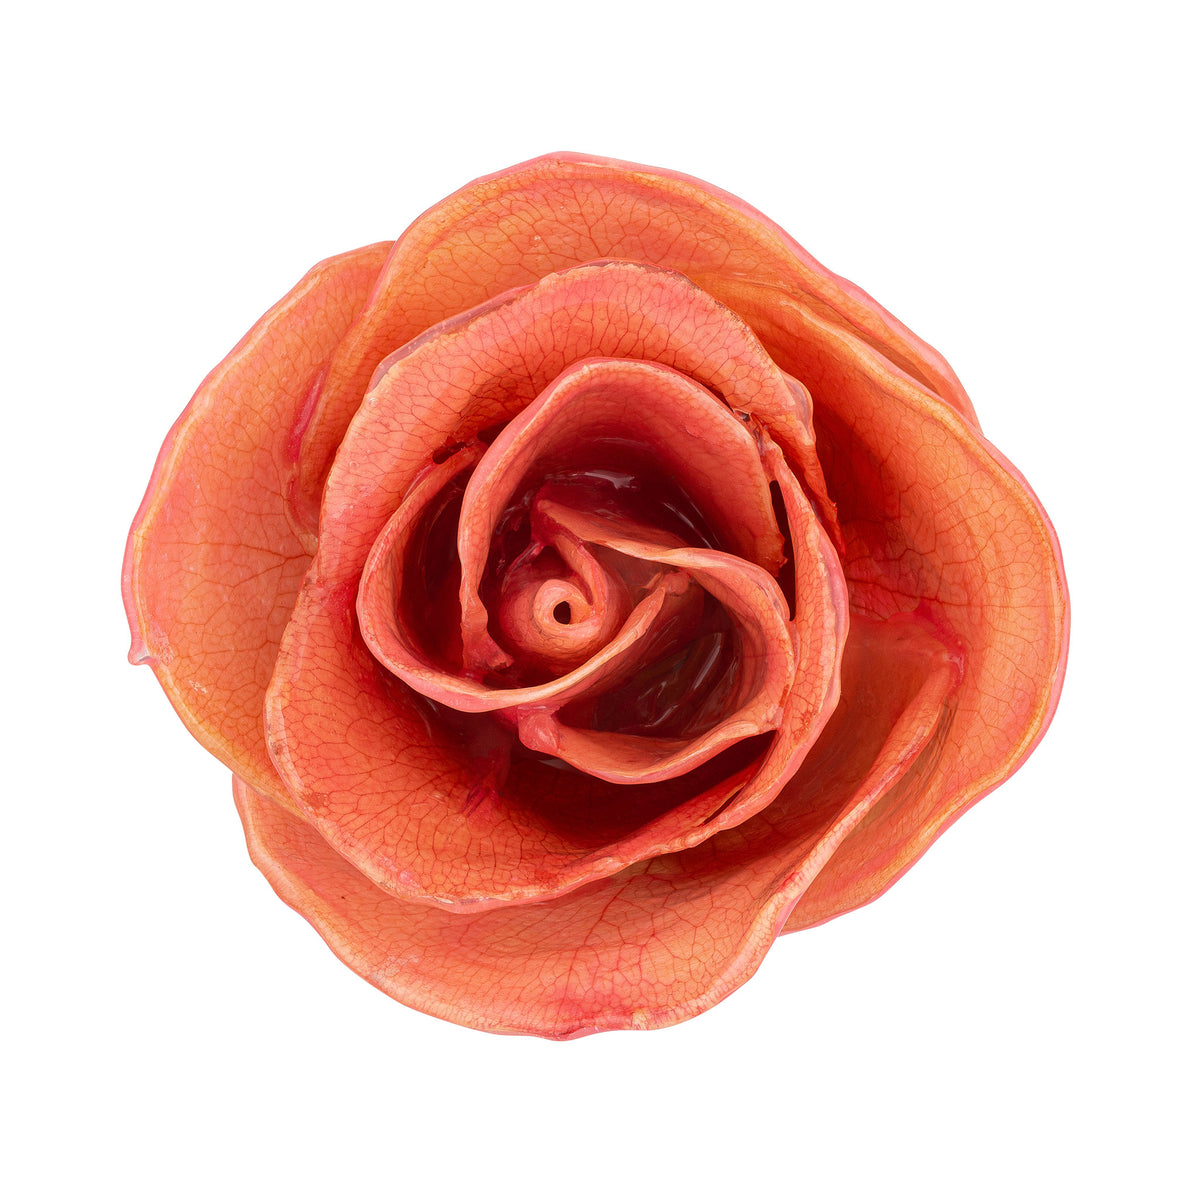 Natural (Green Stem) Forever Rose with Pink Colored Petals. View of Stem, Leaves, and Rose Petals. This a Forever Rose without any gold or other precious metals on it.